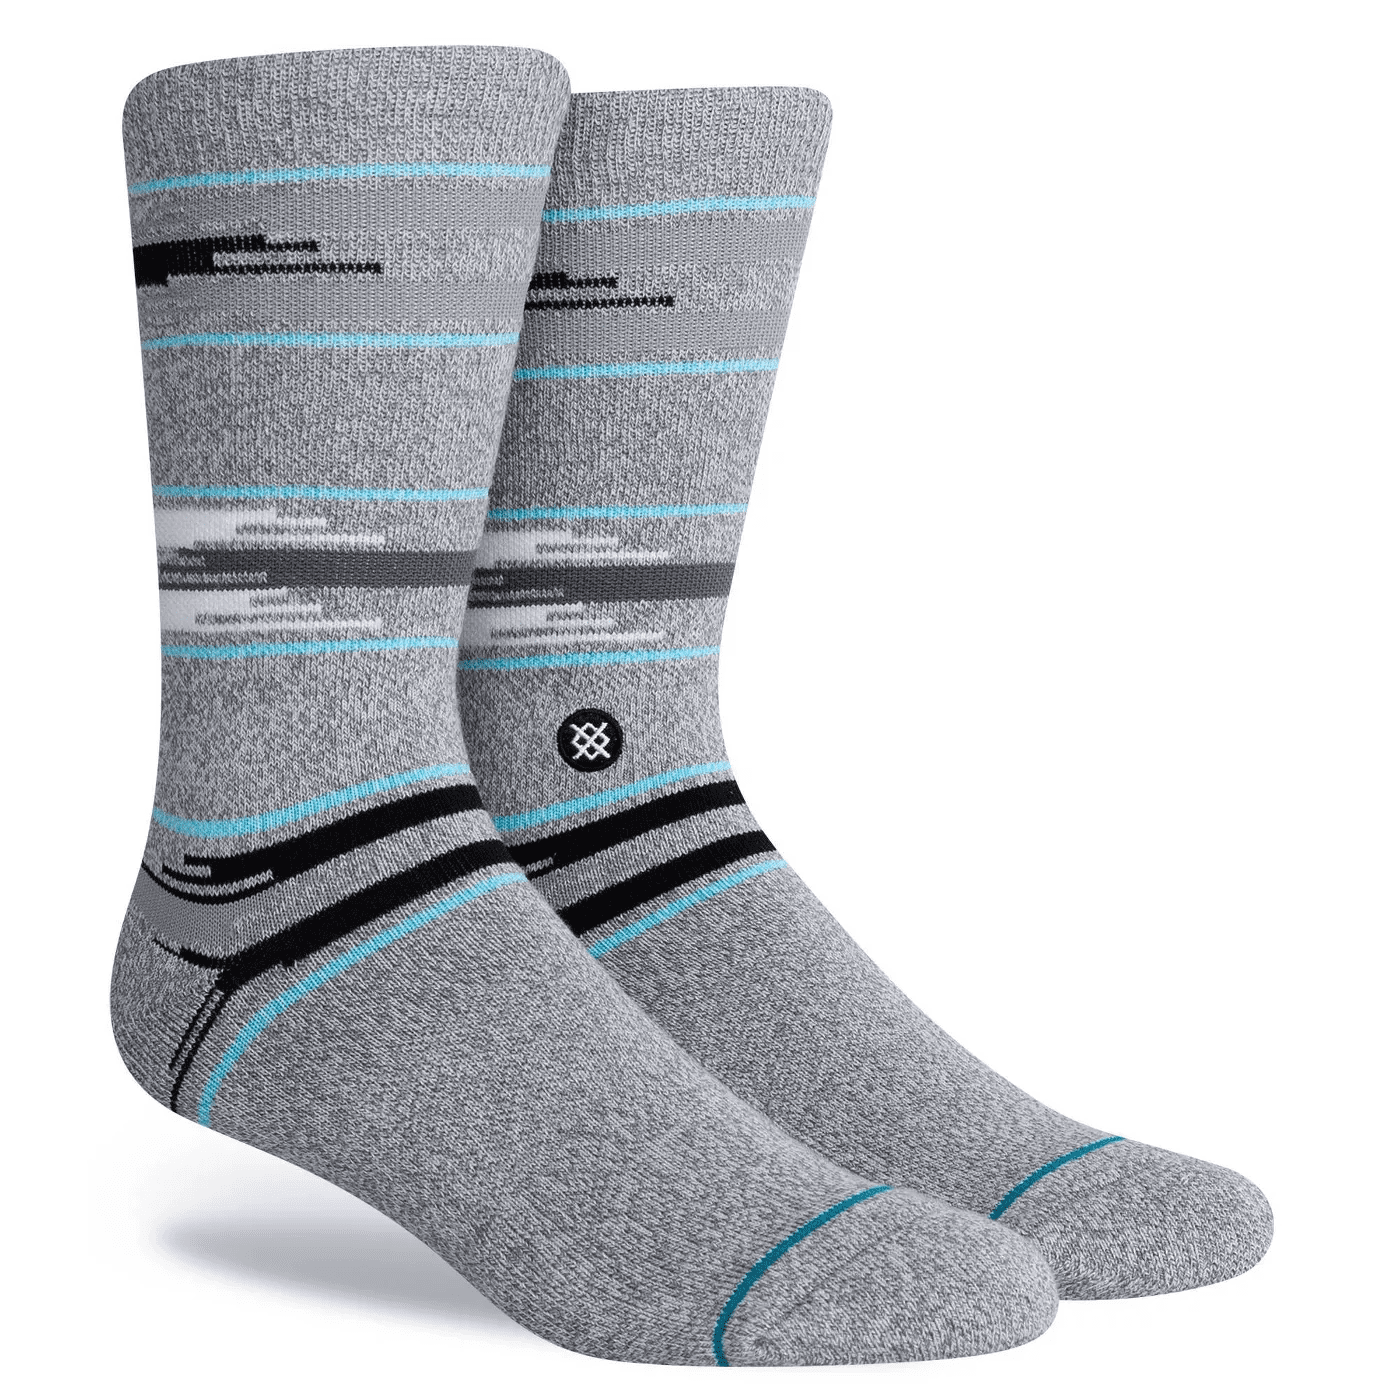 STANCE x WADE Striped Spectrum Crew Socks - Multi-colored, Large/6-12 ...